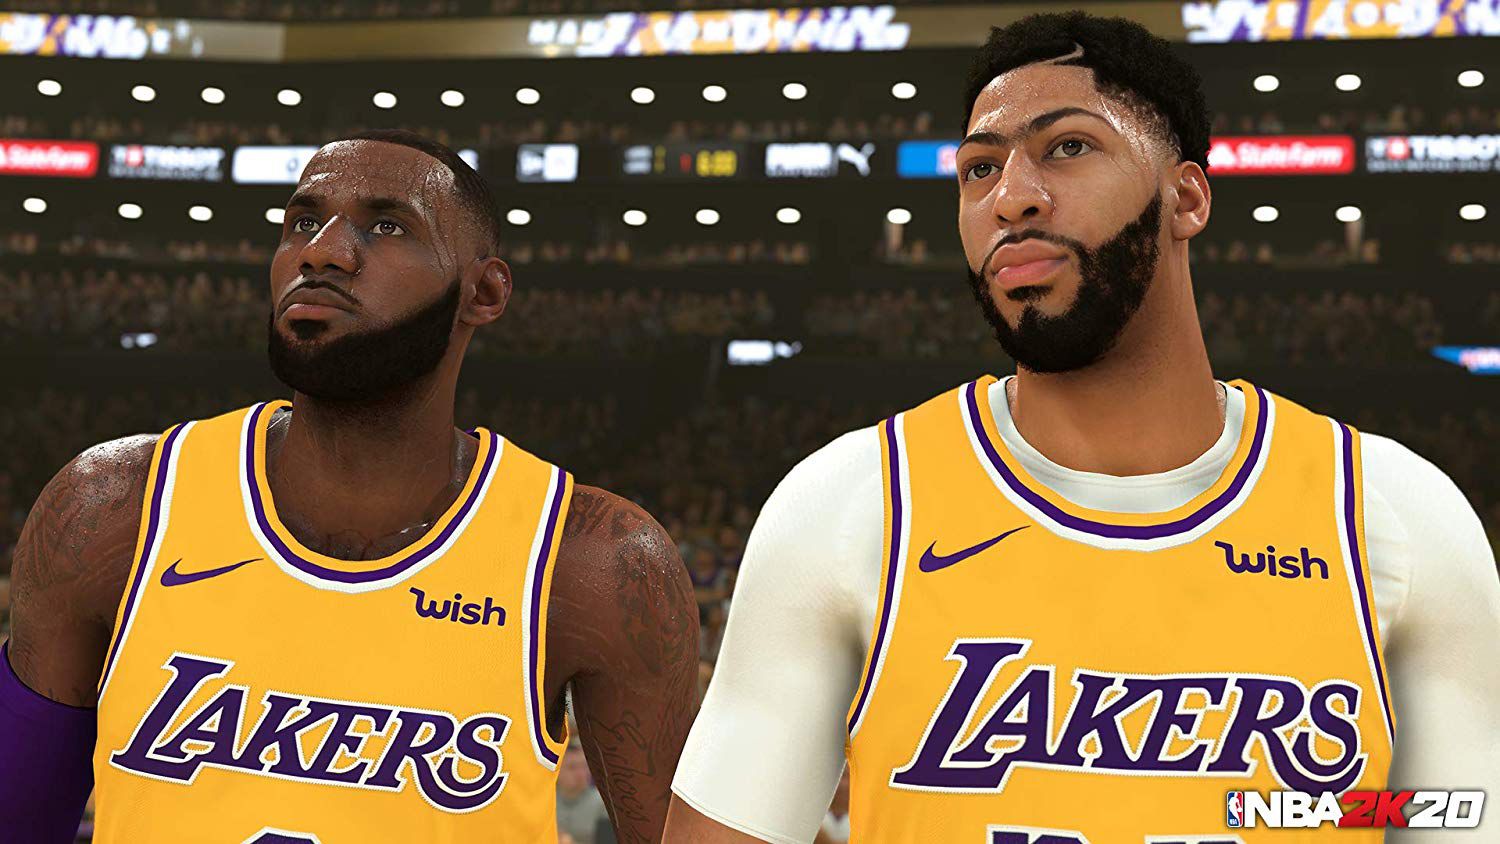 Finally was able to make custom jerseys in MyTeam. How did I do